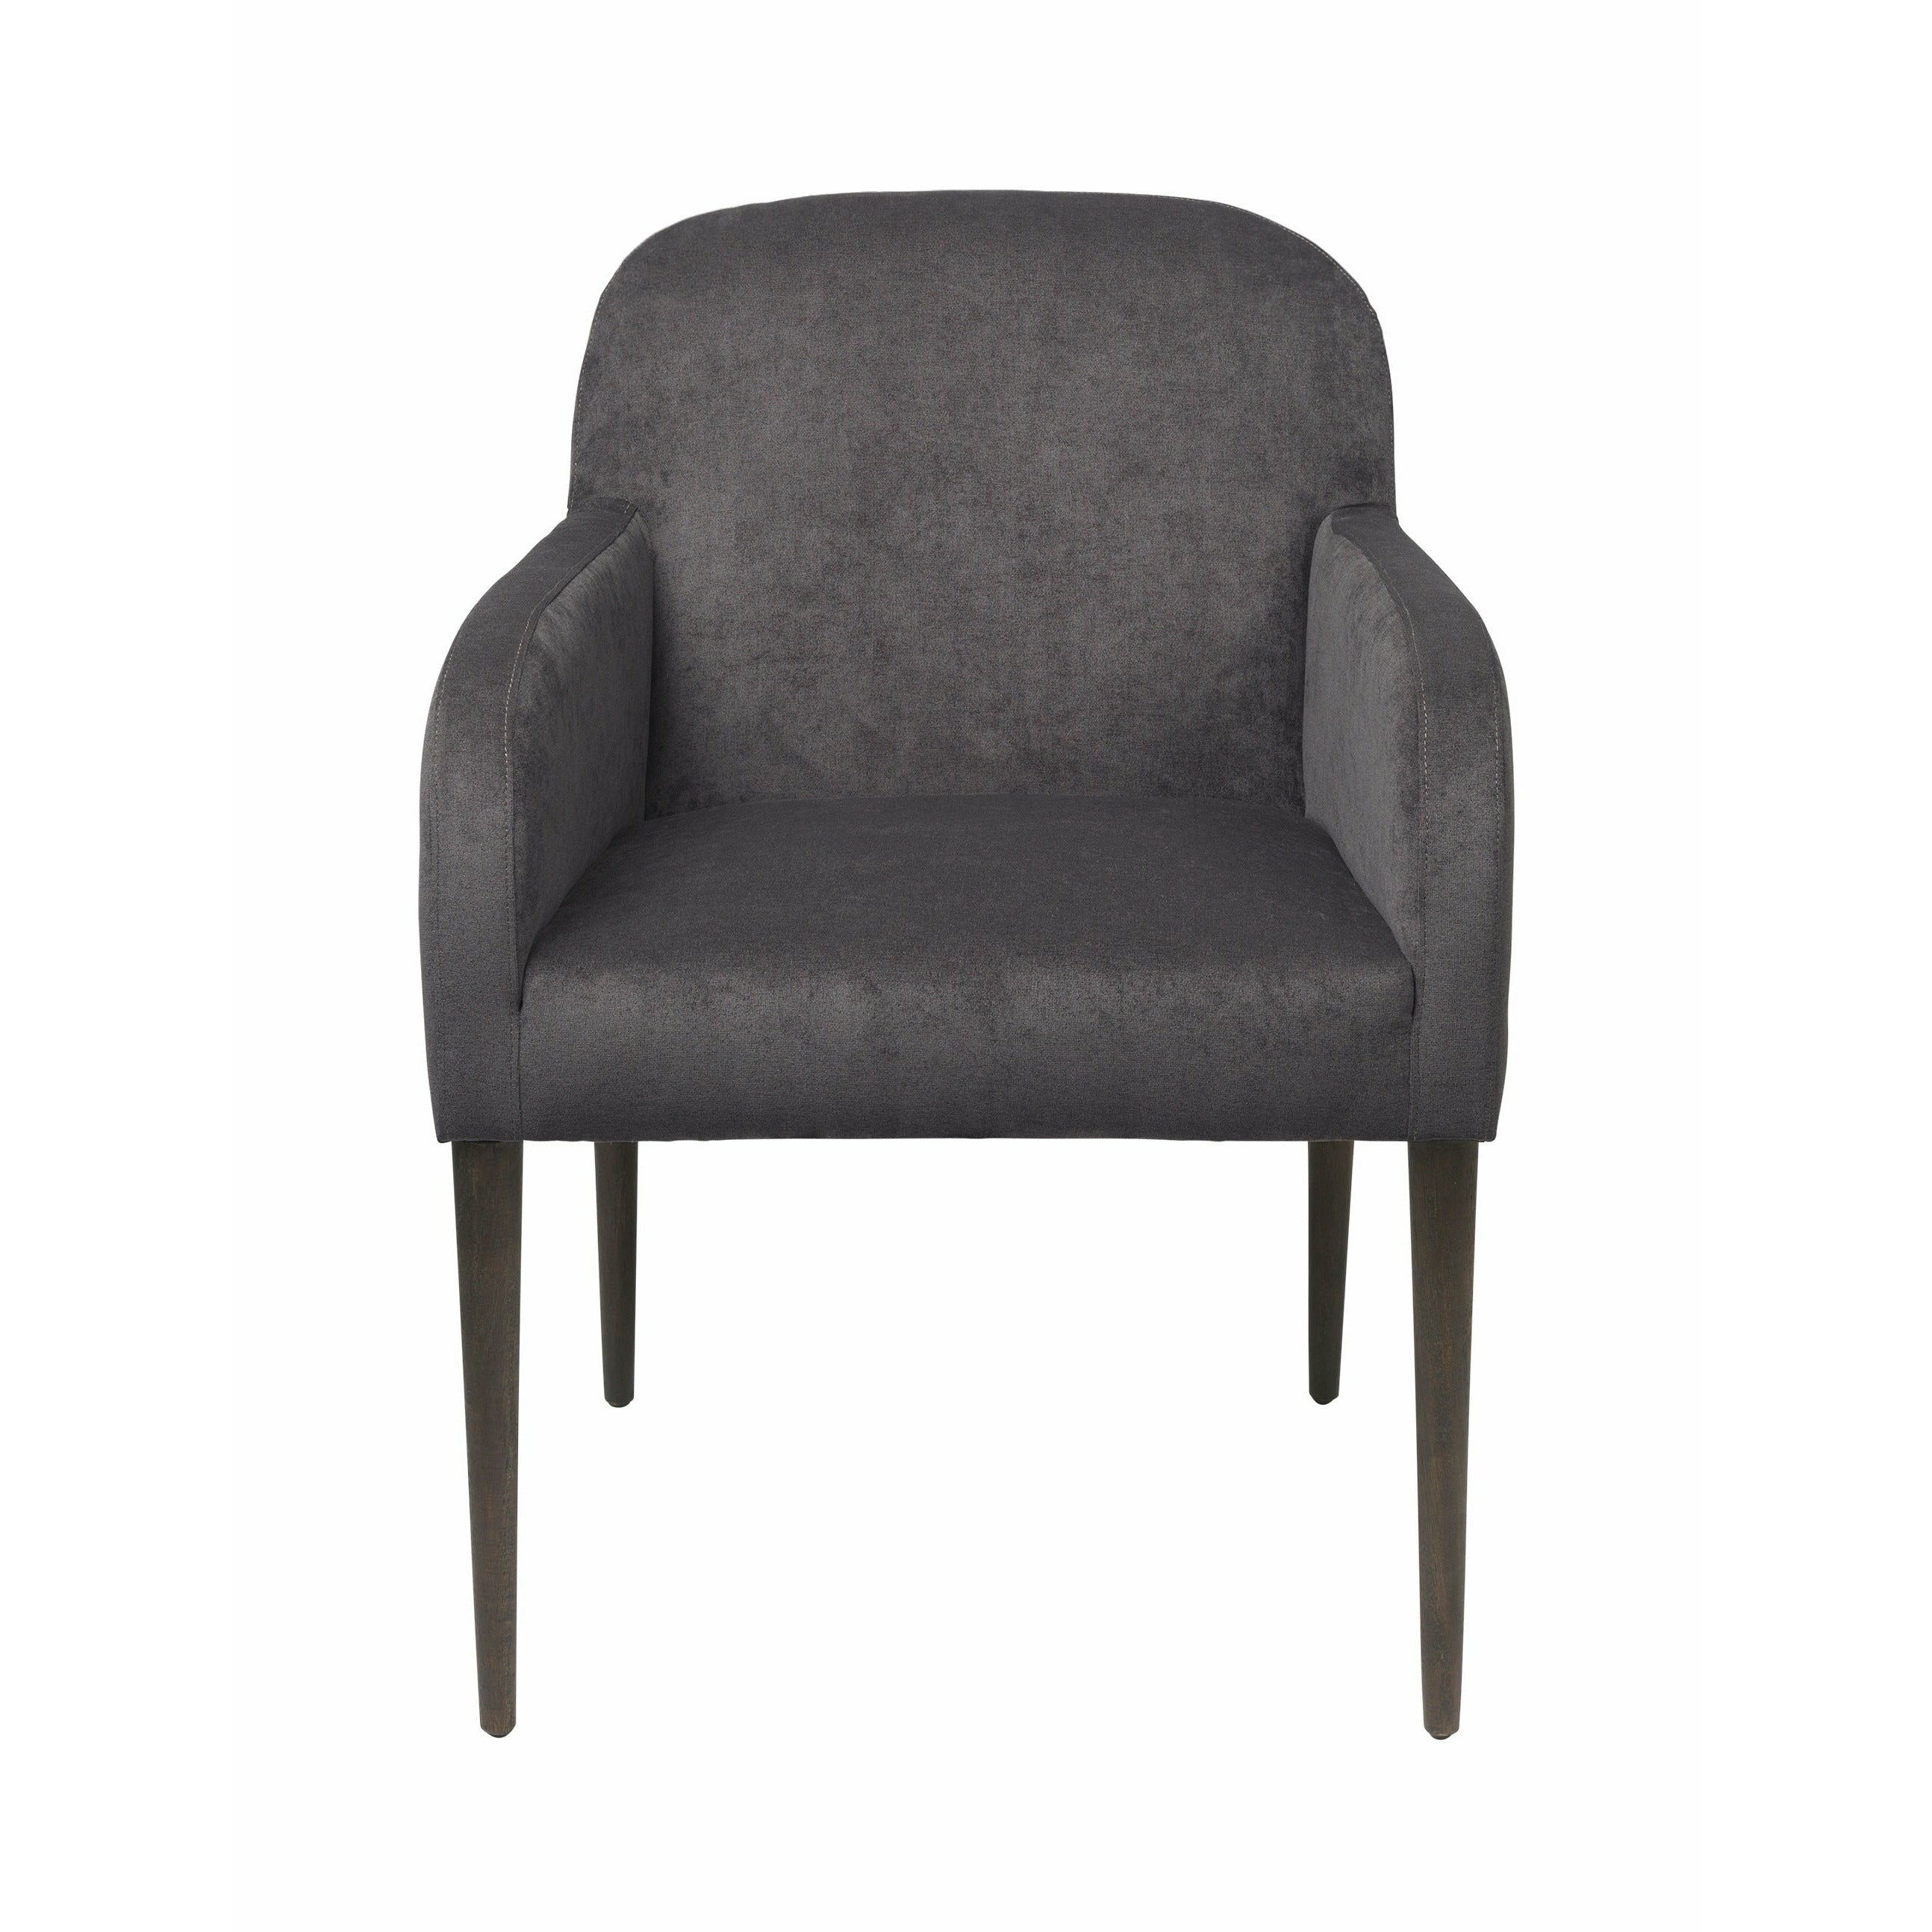 Cosy Living Gotland Dining Chair - Storm*